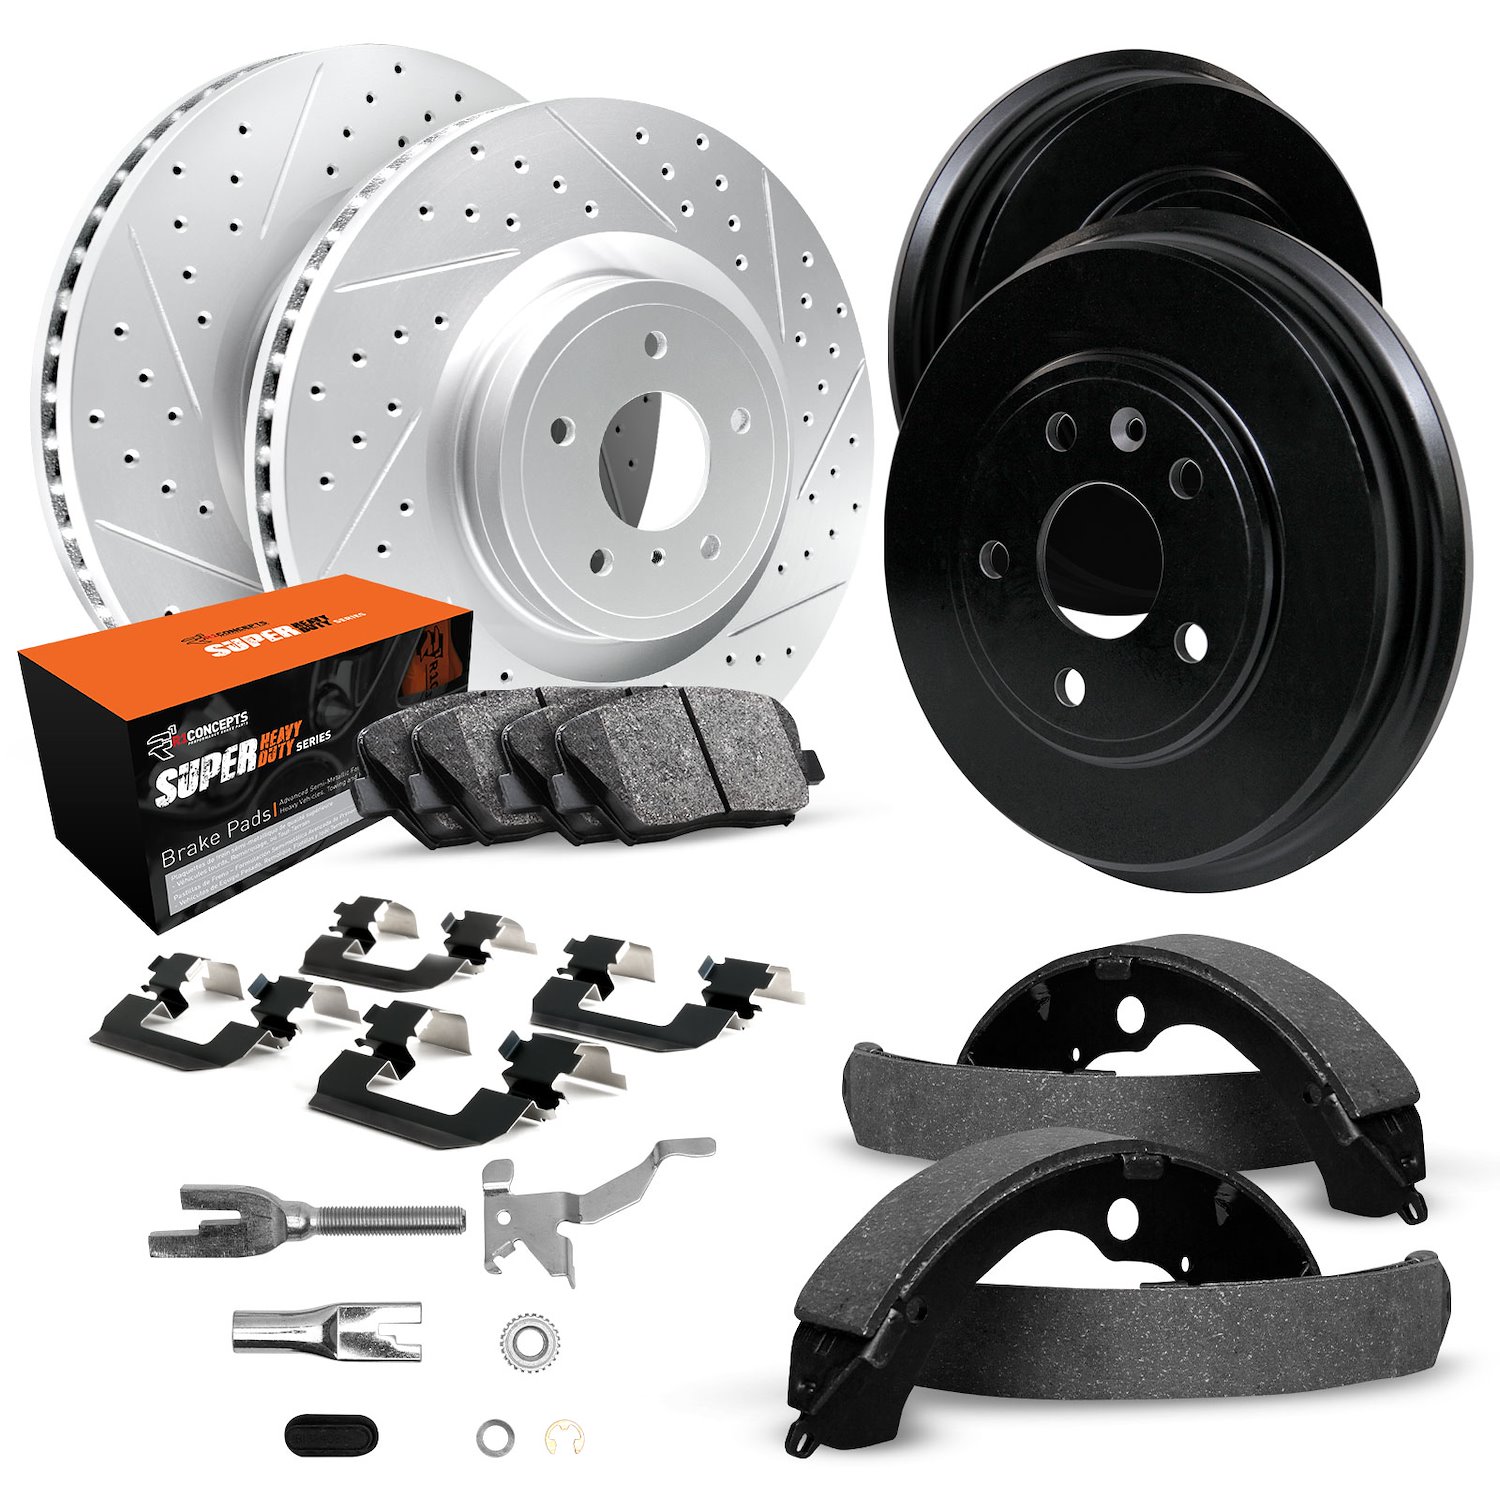 GEO-Carbon Drilled/Slotted Rotors/Drums w/Super-Duty Pads/Shoes/Hardware/Adjusters, 1990-1999 Mopar, Position: Front/Rear